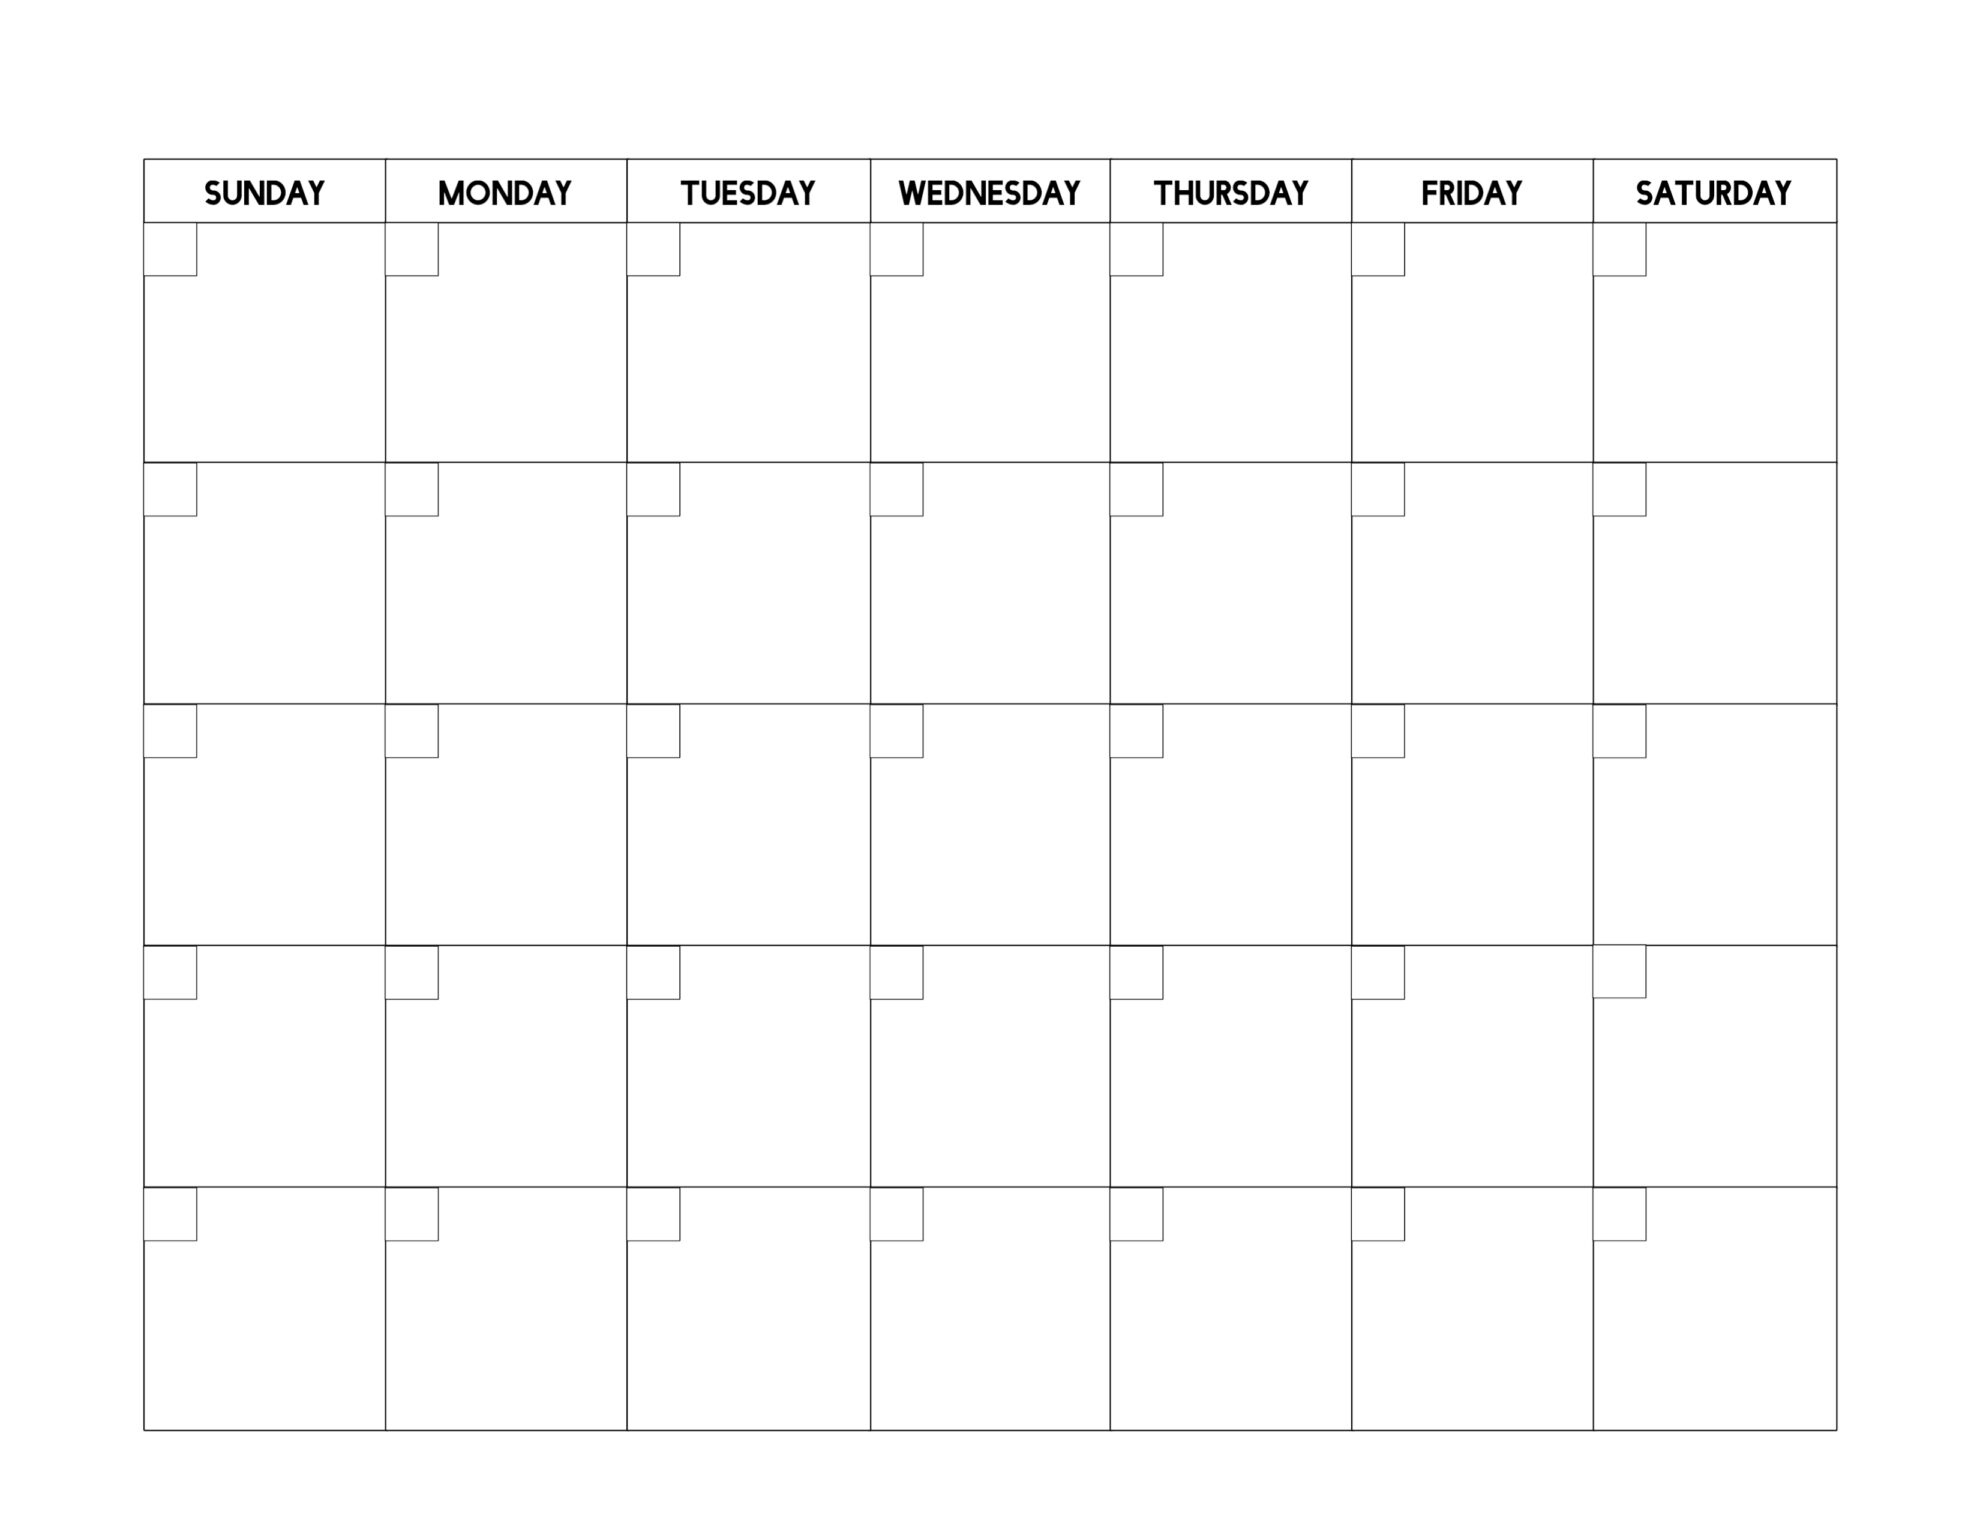 Free Printable Blank Calendar Template | Paper Trail Design Calendar Template On Pages